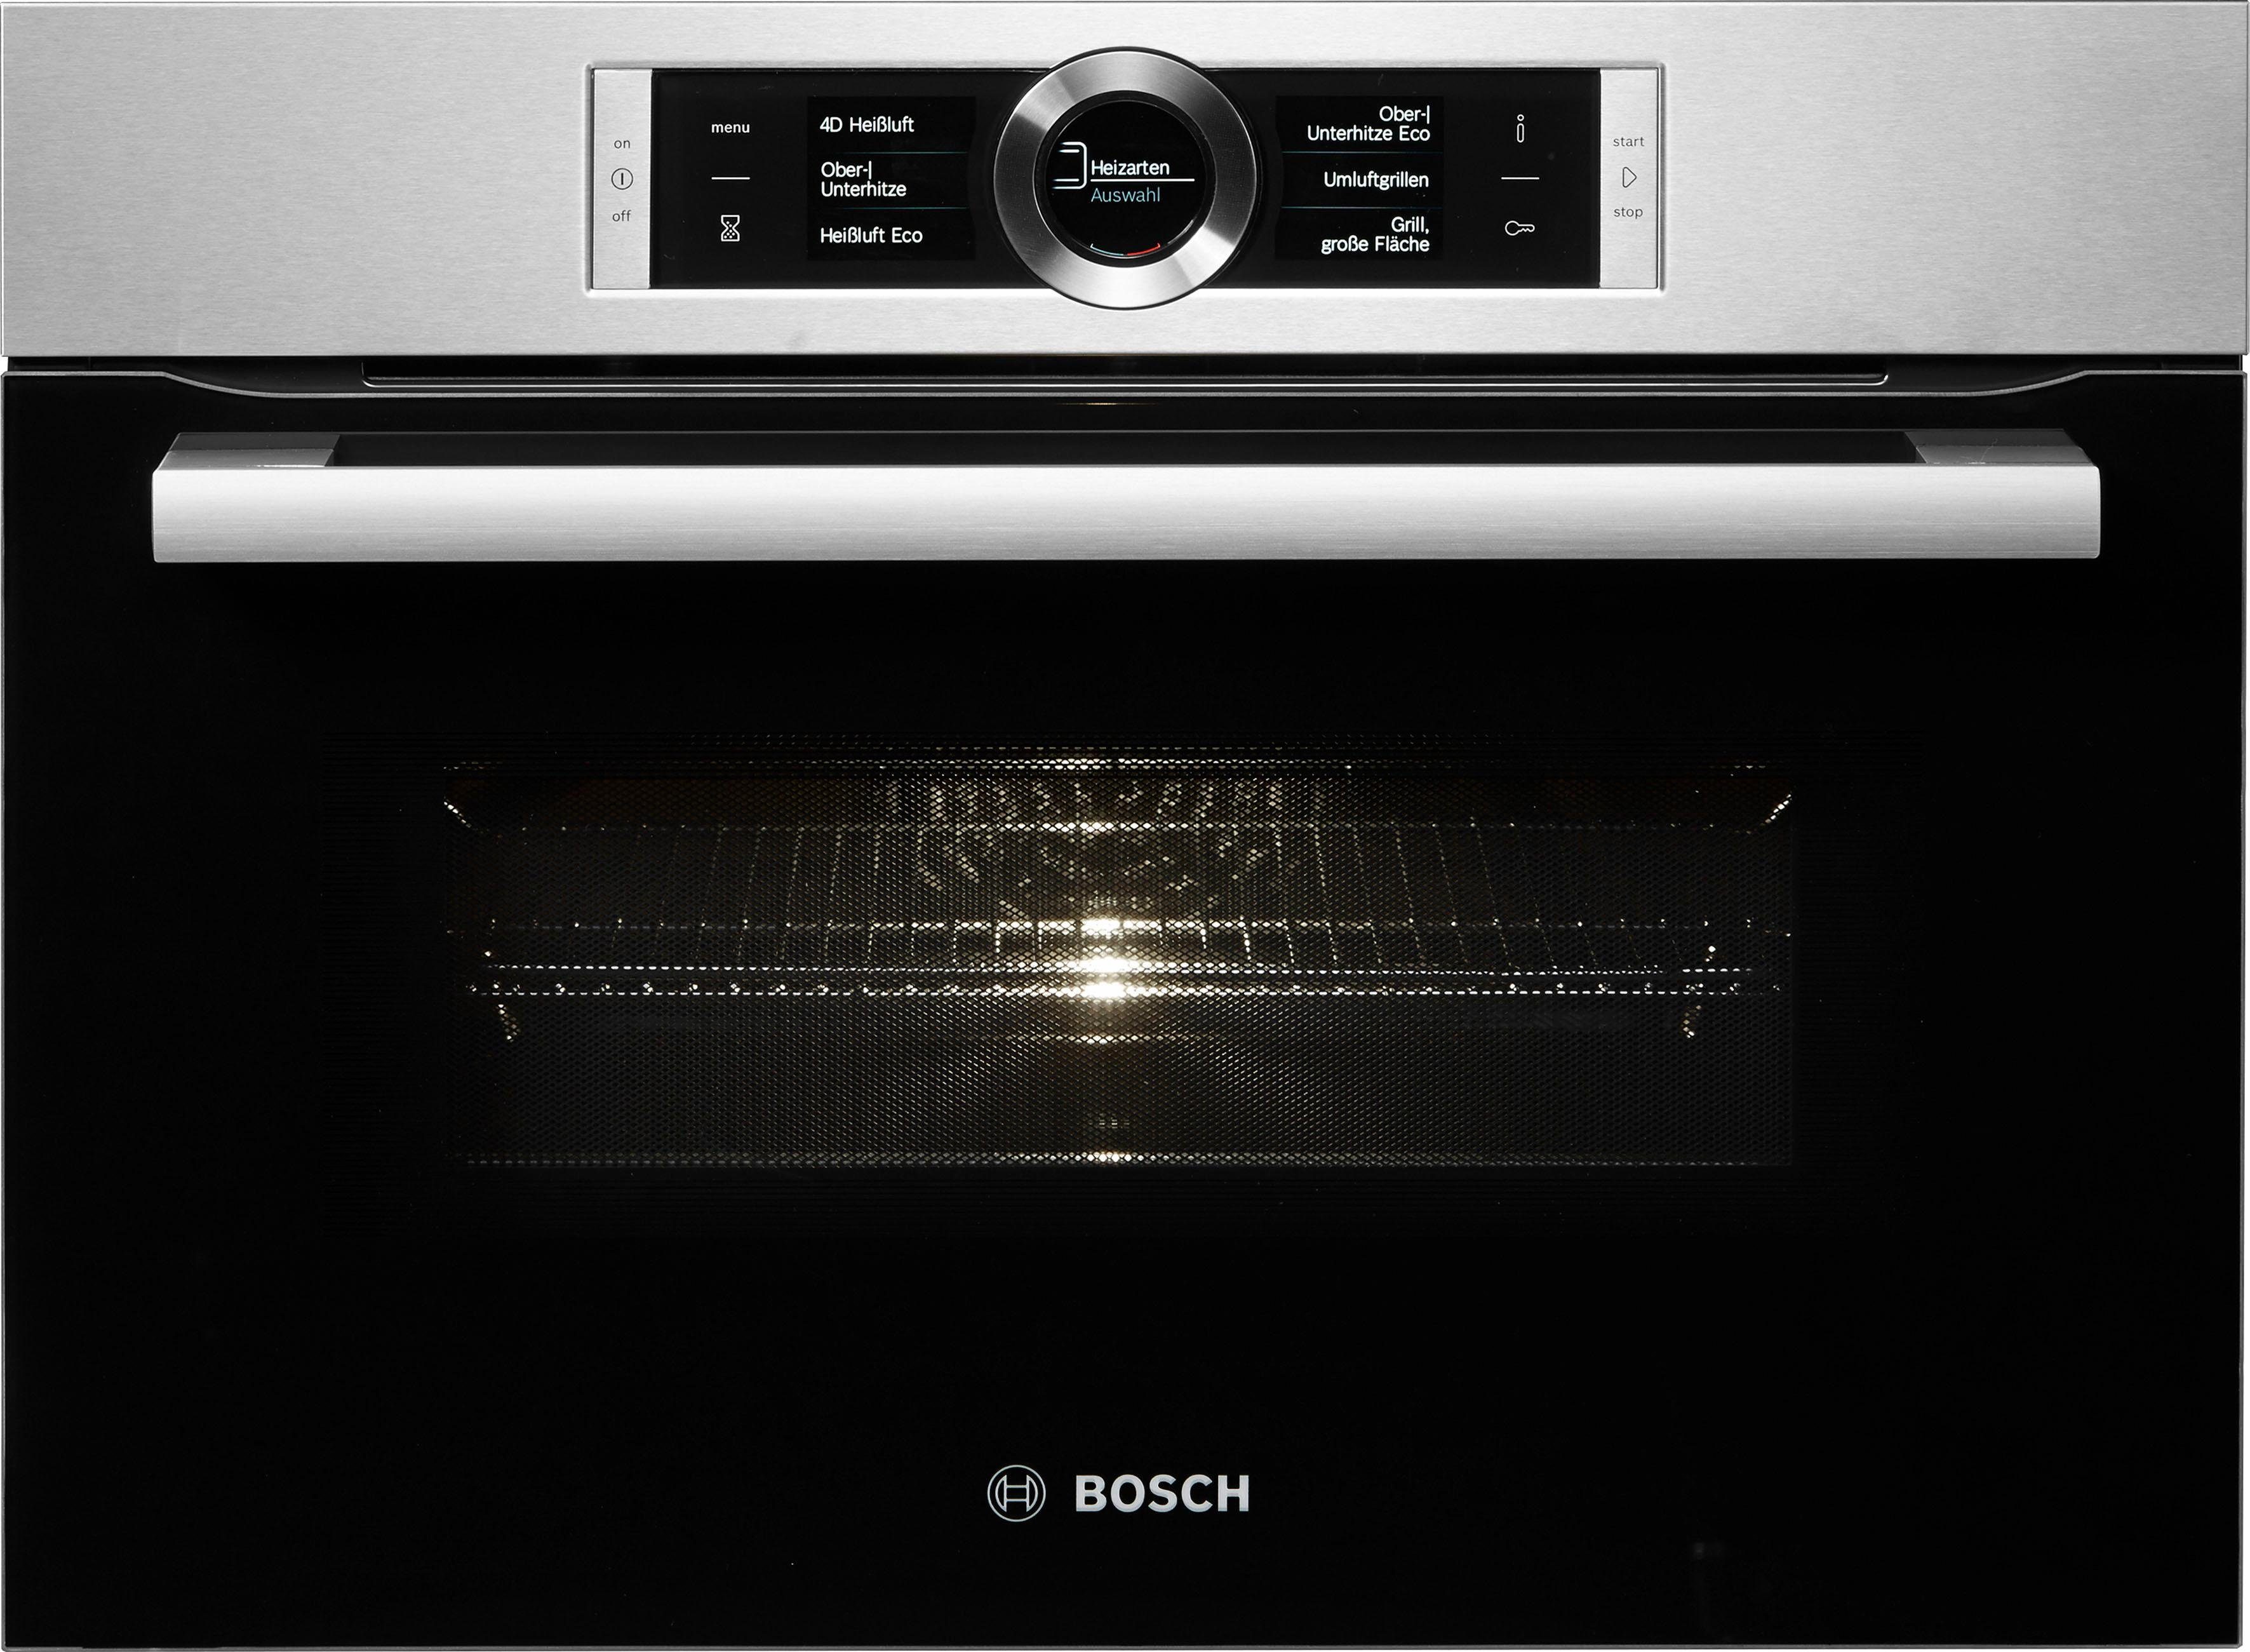 BOSCH Backofen mit Mikrowelle Direct CMG636BS1, ecoClean